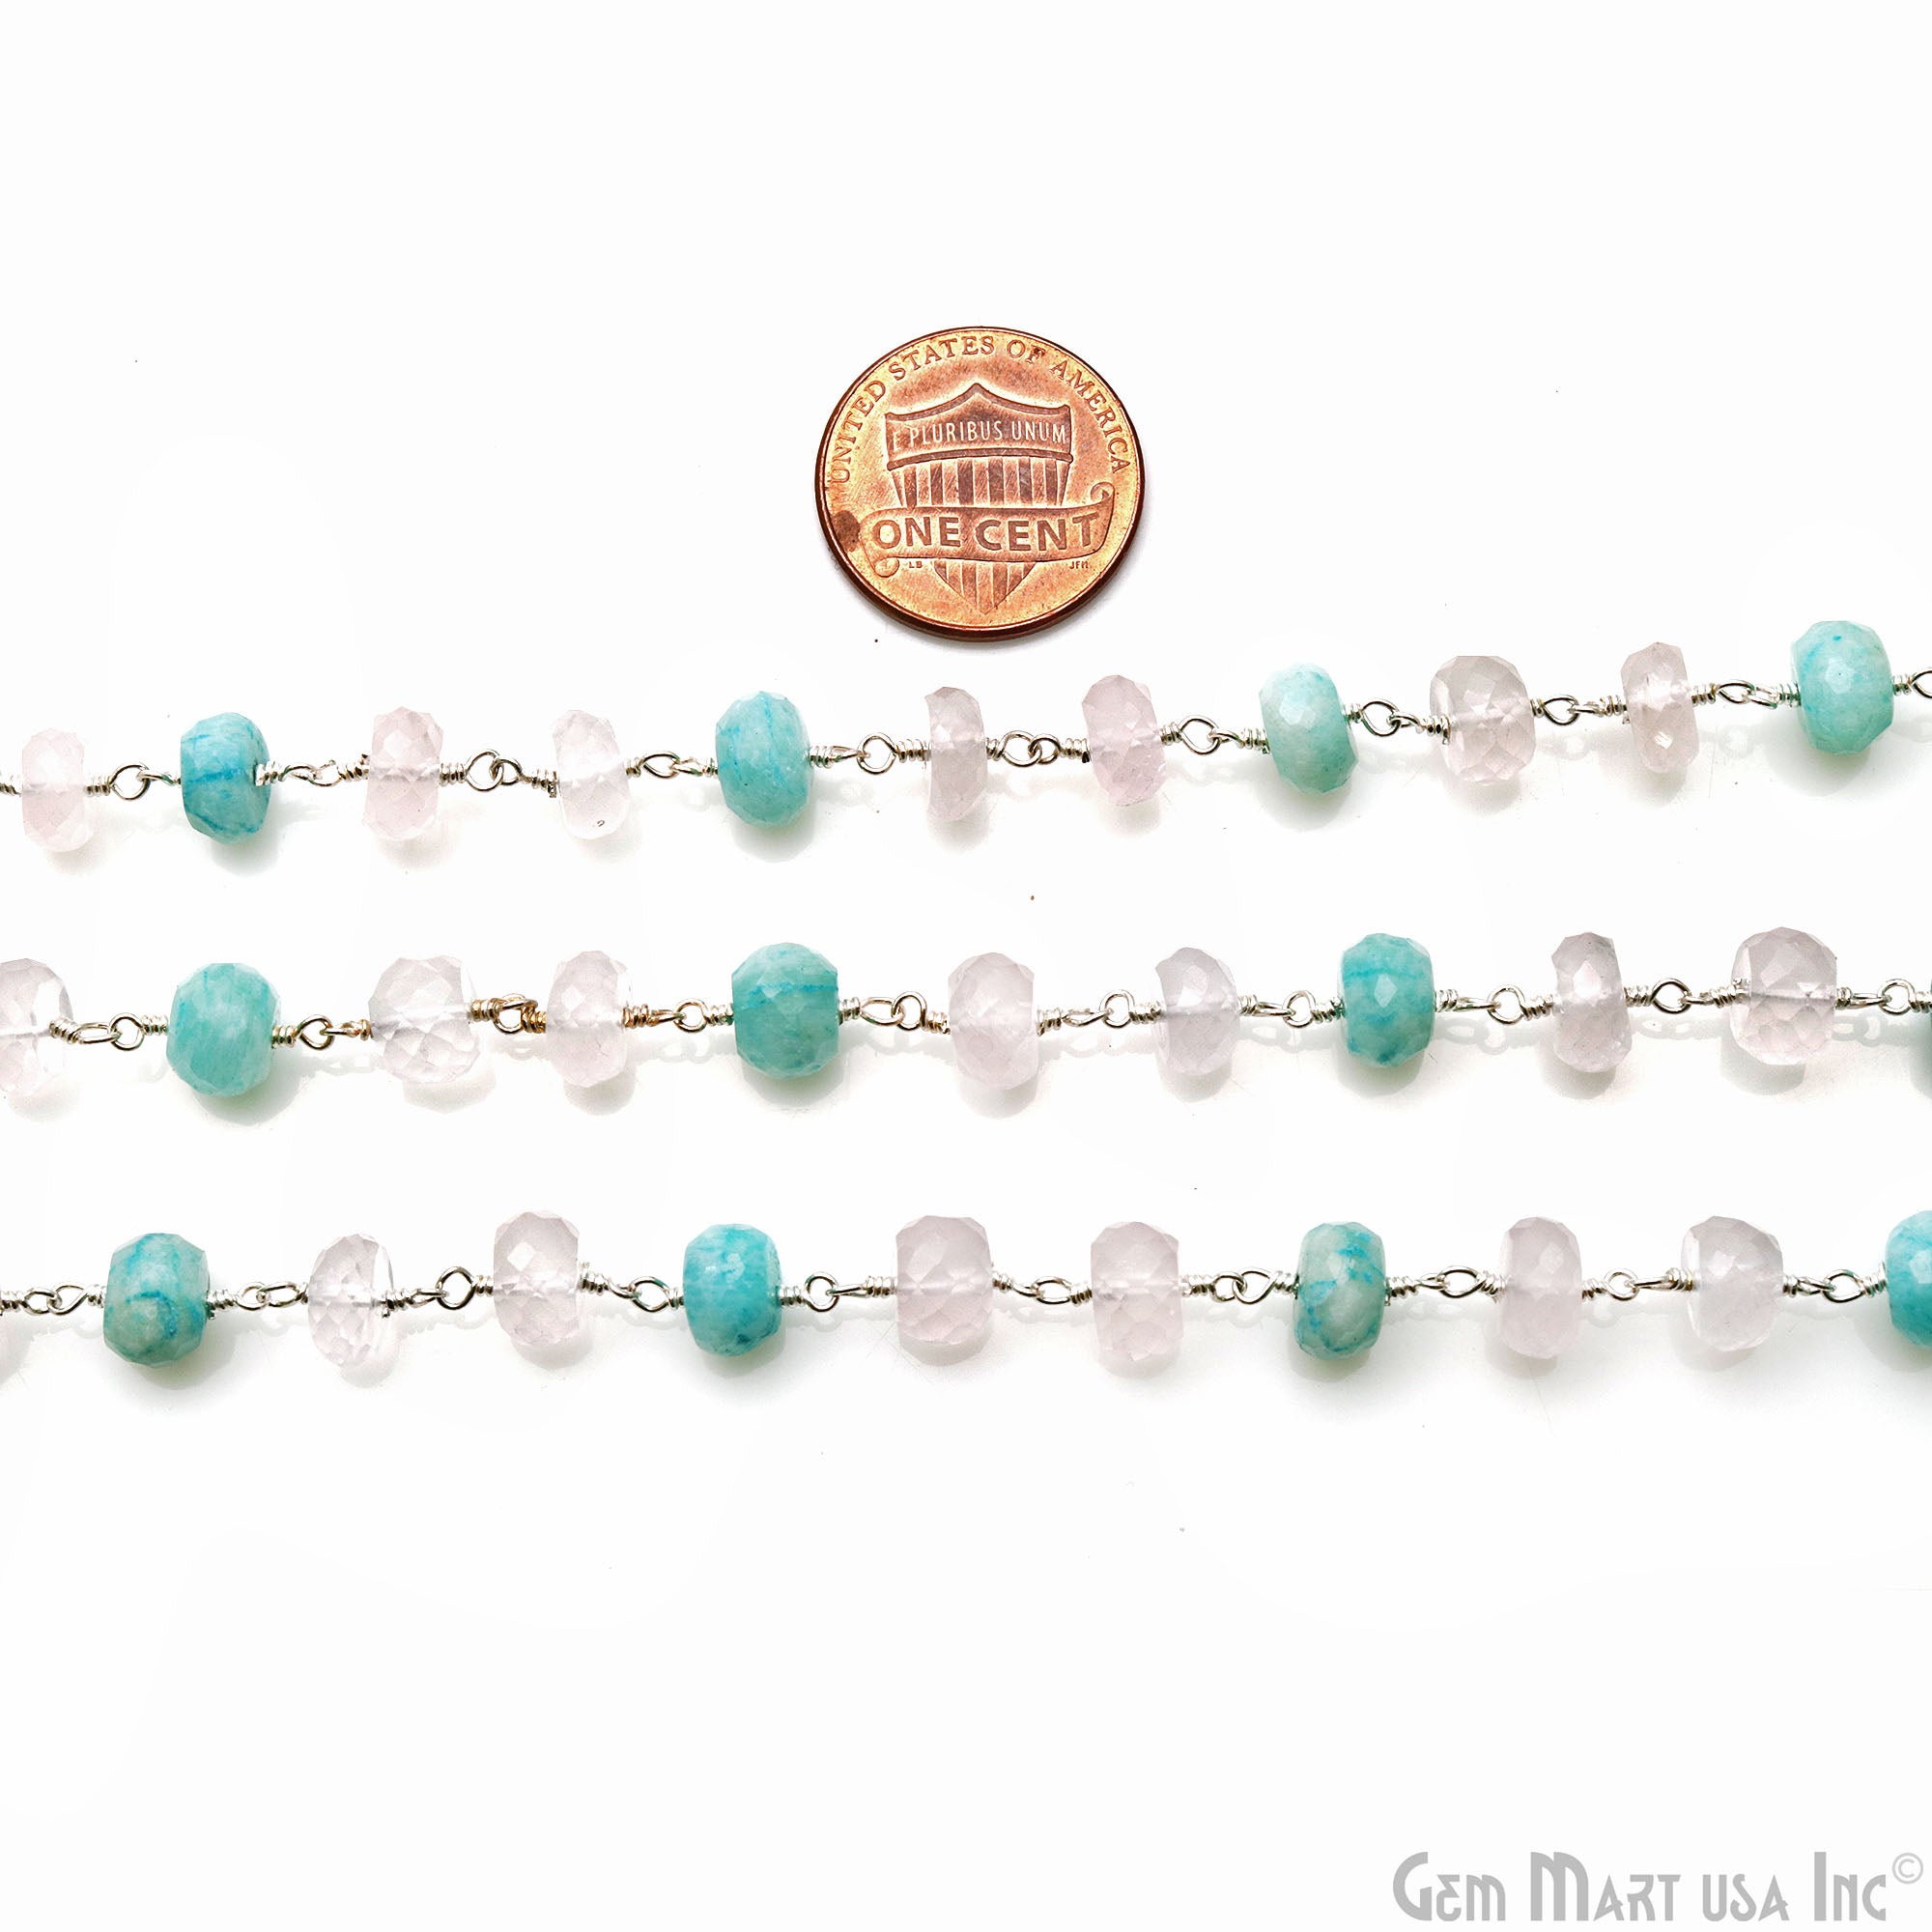 Rose Quartz With Amazonite Rondelle Beads Silver Wire Wrapped Rosary Chain